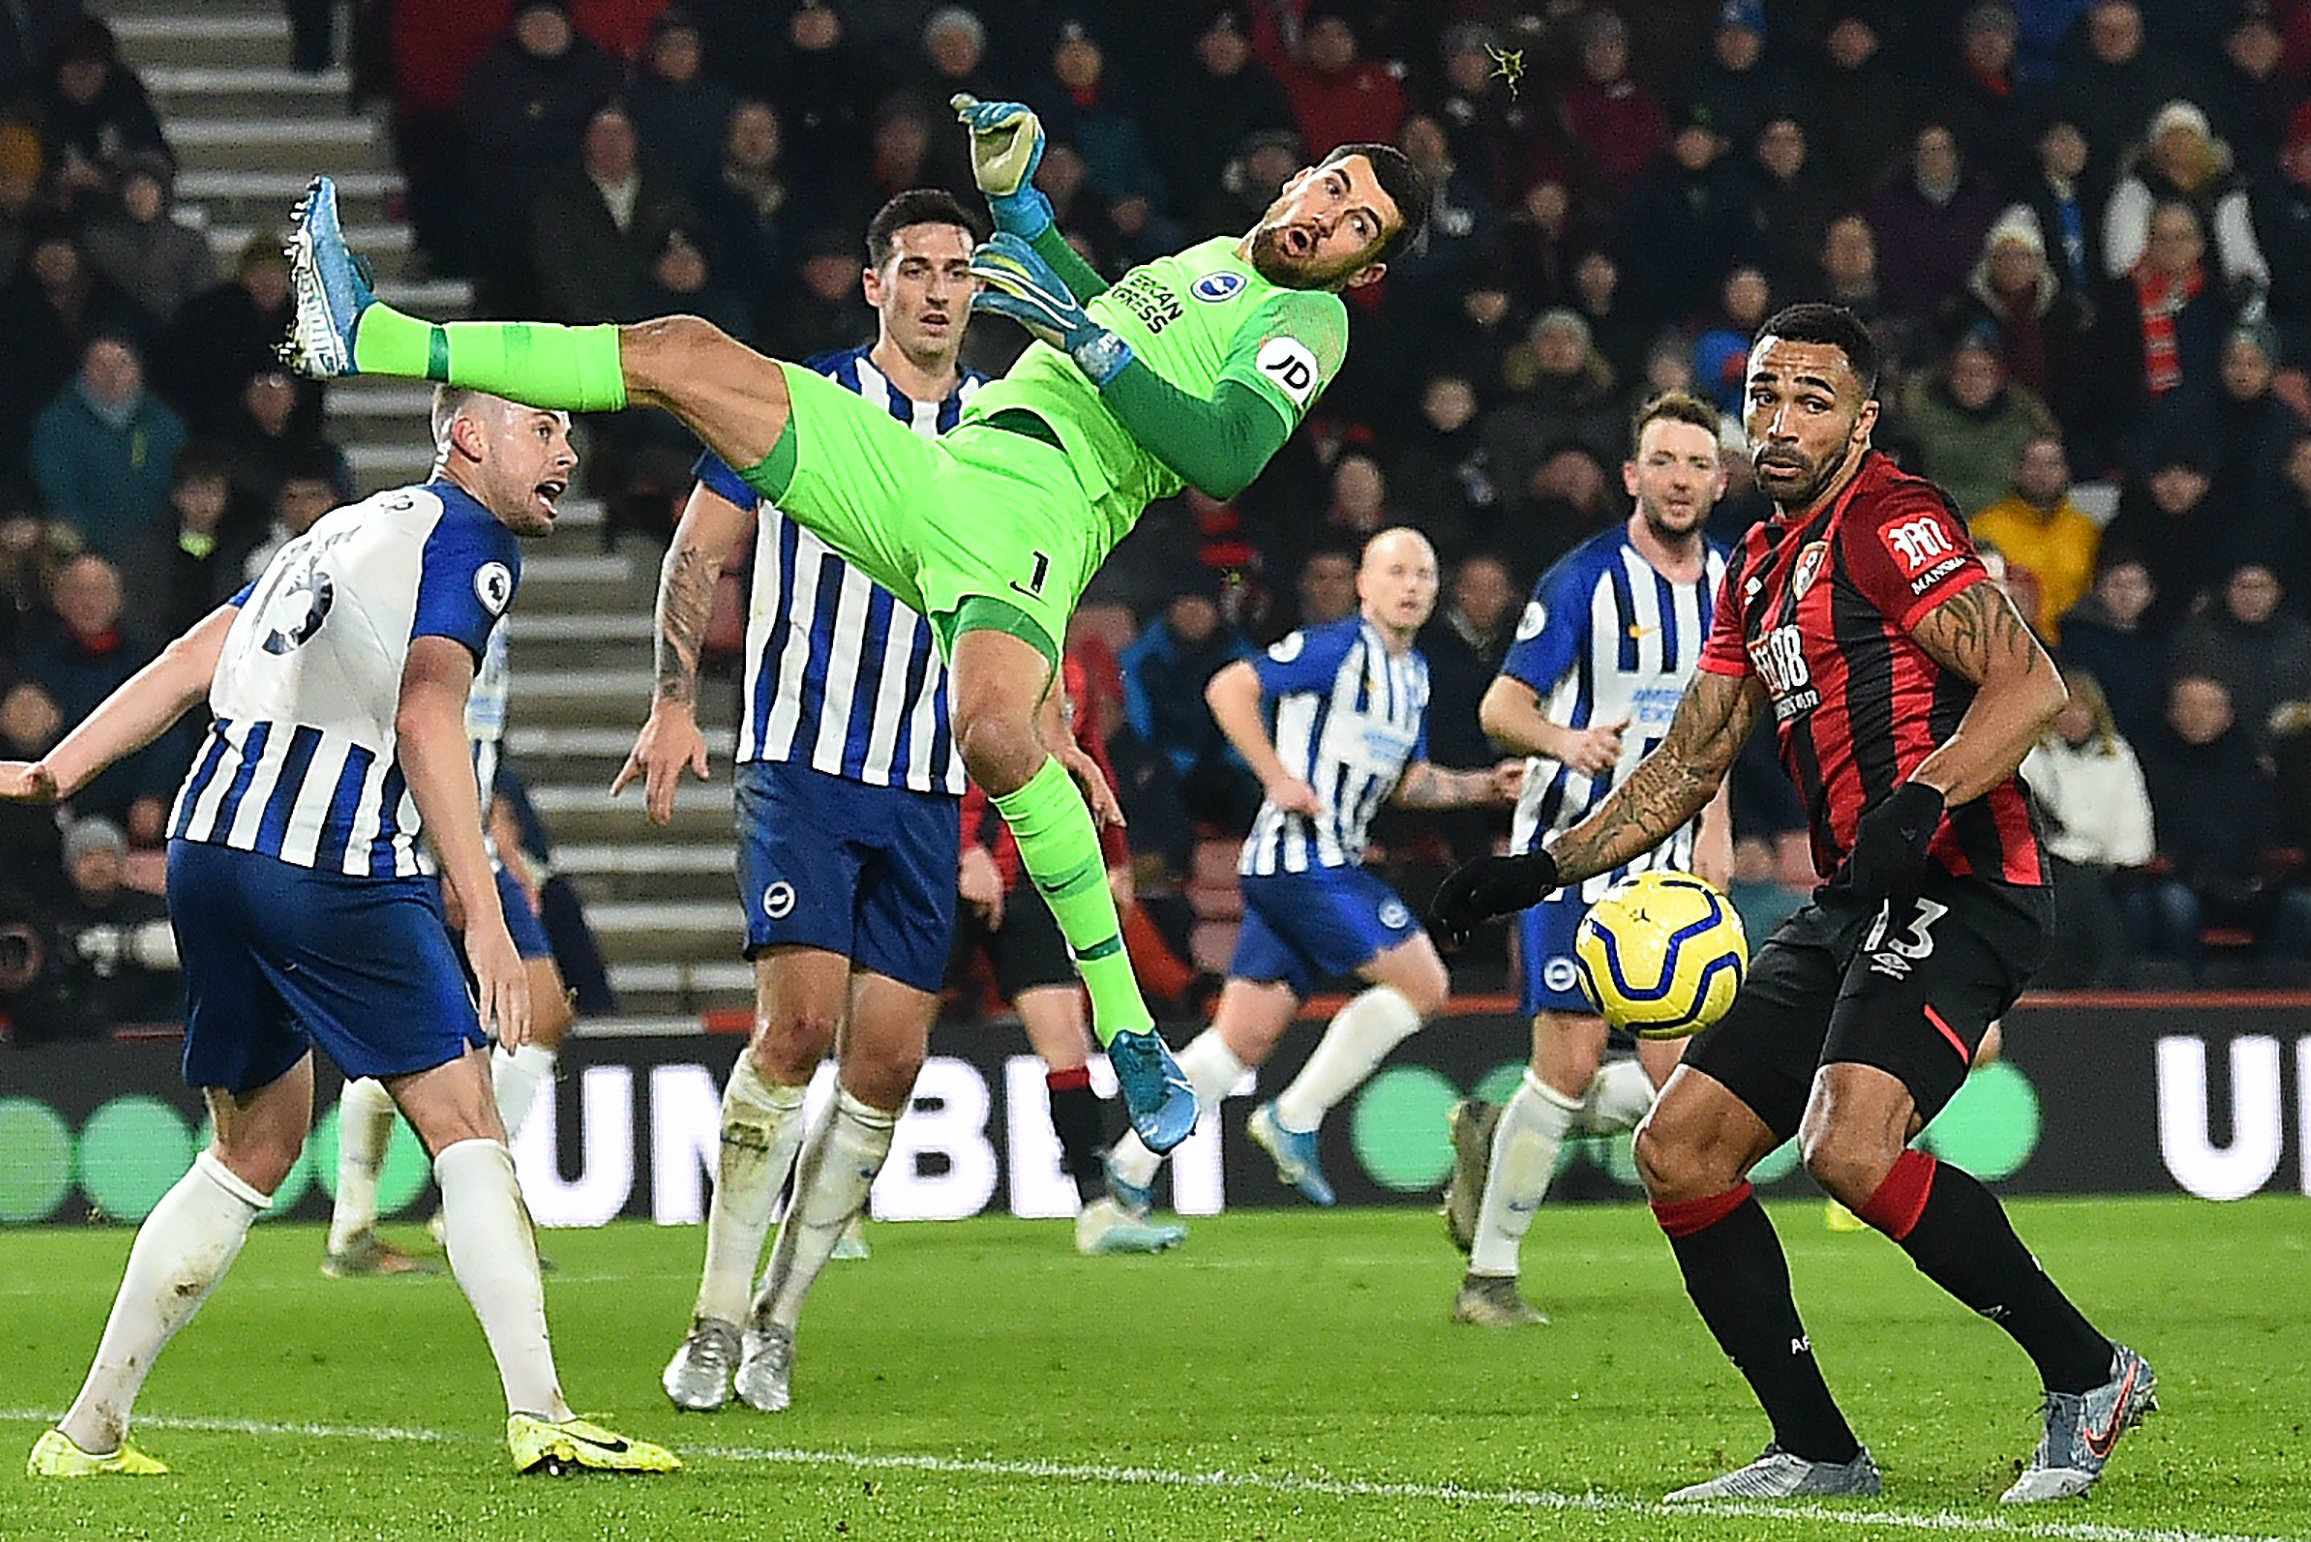 Mat Ryan throwns himself at the ball against Bournemouth